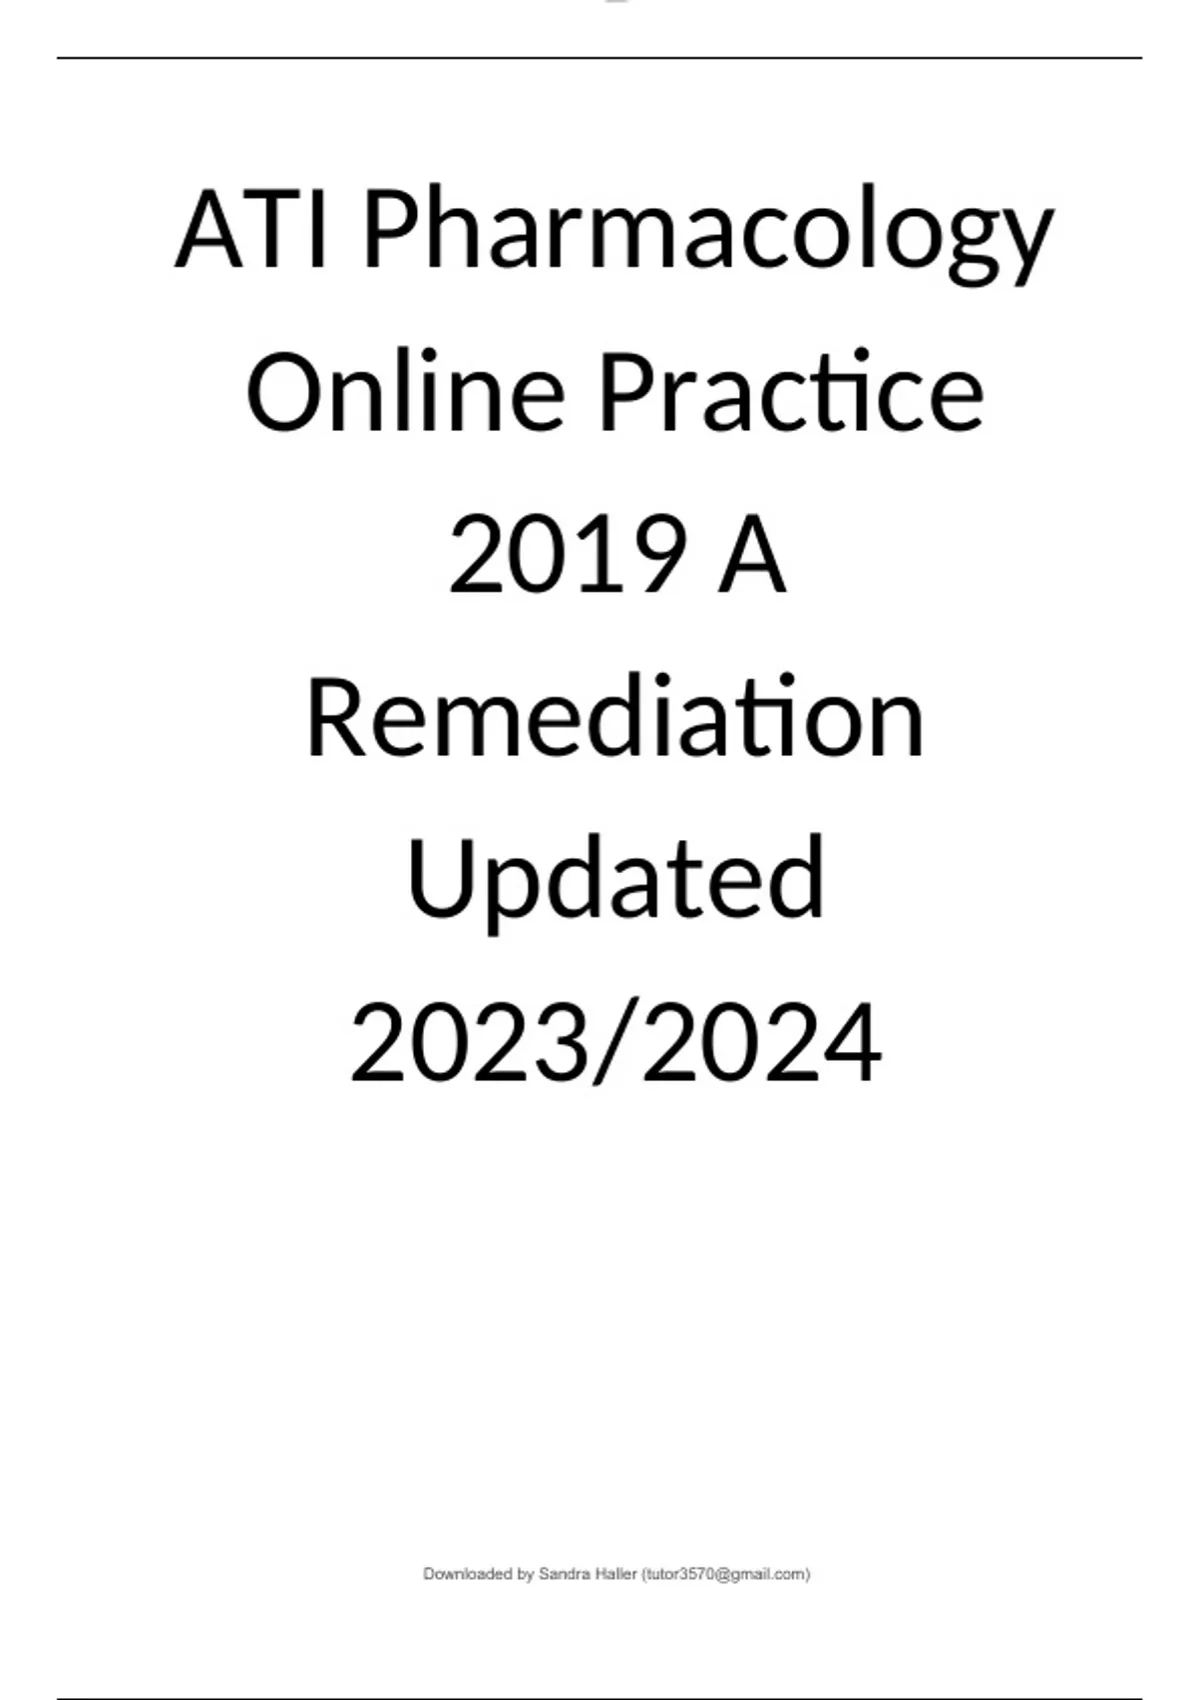 ATI Pharmacology Online Practice 2019 A Remediation Updated 2023